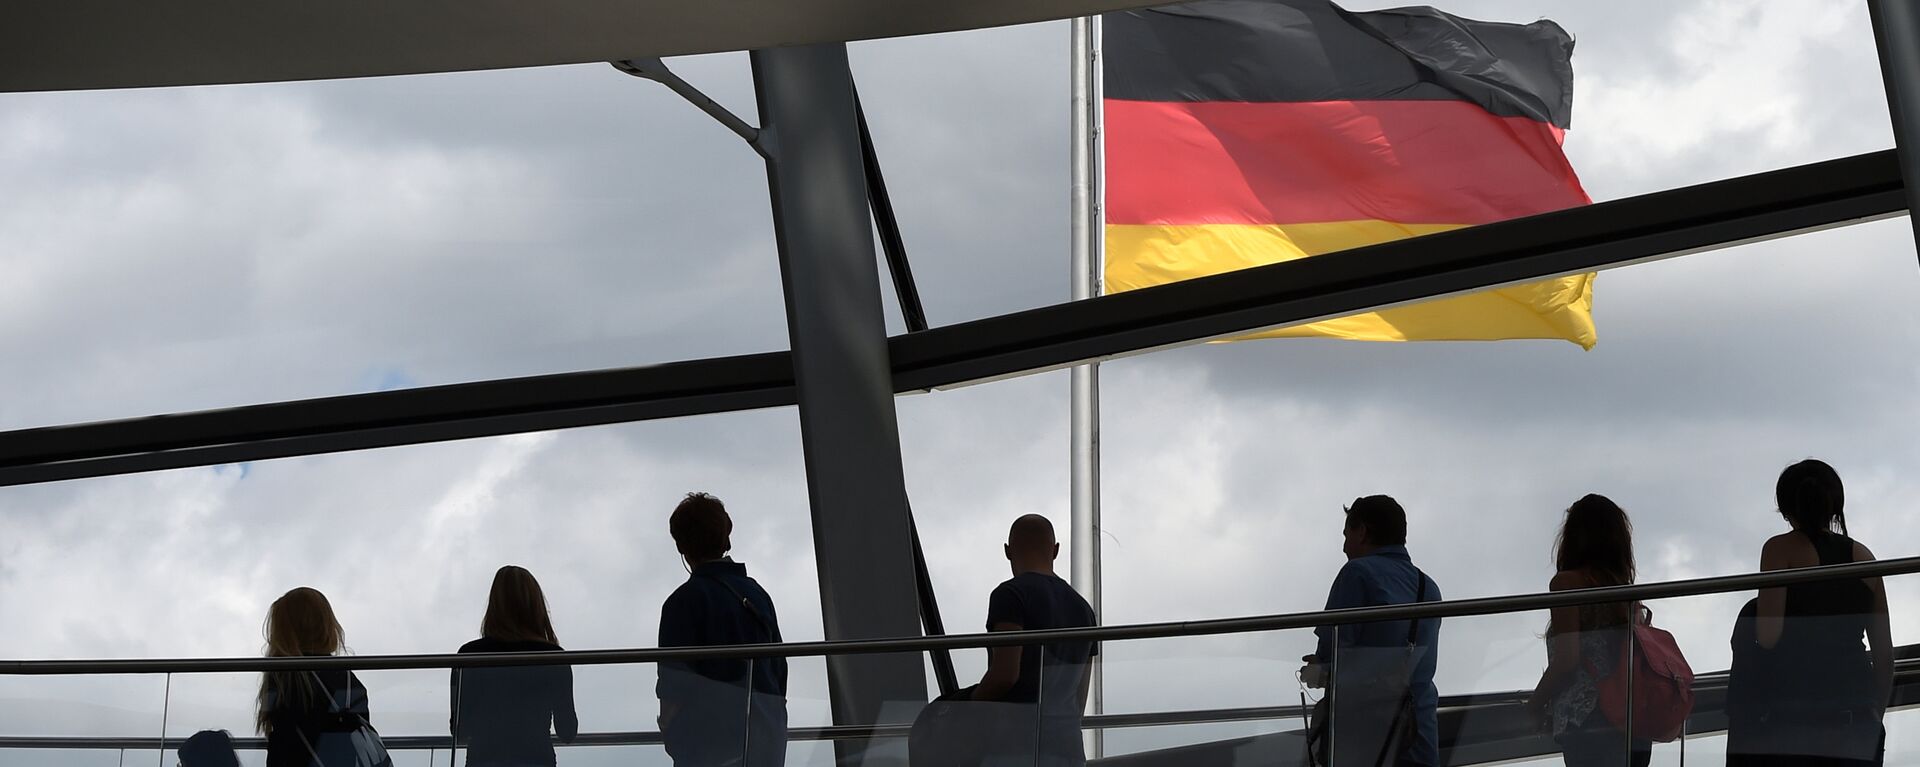 Visitors walk in the glass cupola of the Reichstag building that hosts the German parliament (Bundestag) and look at a German flag in Berlin, Germany, on June 10, 2016. - Sputnik International, 1920, 07.01.2019